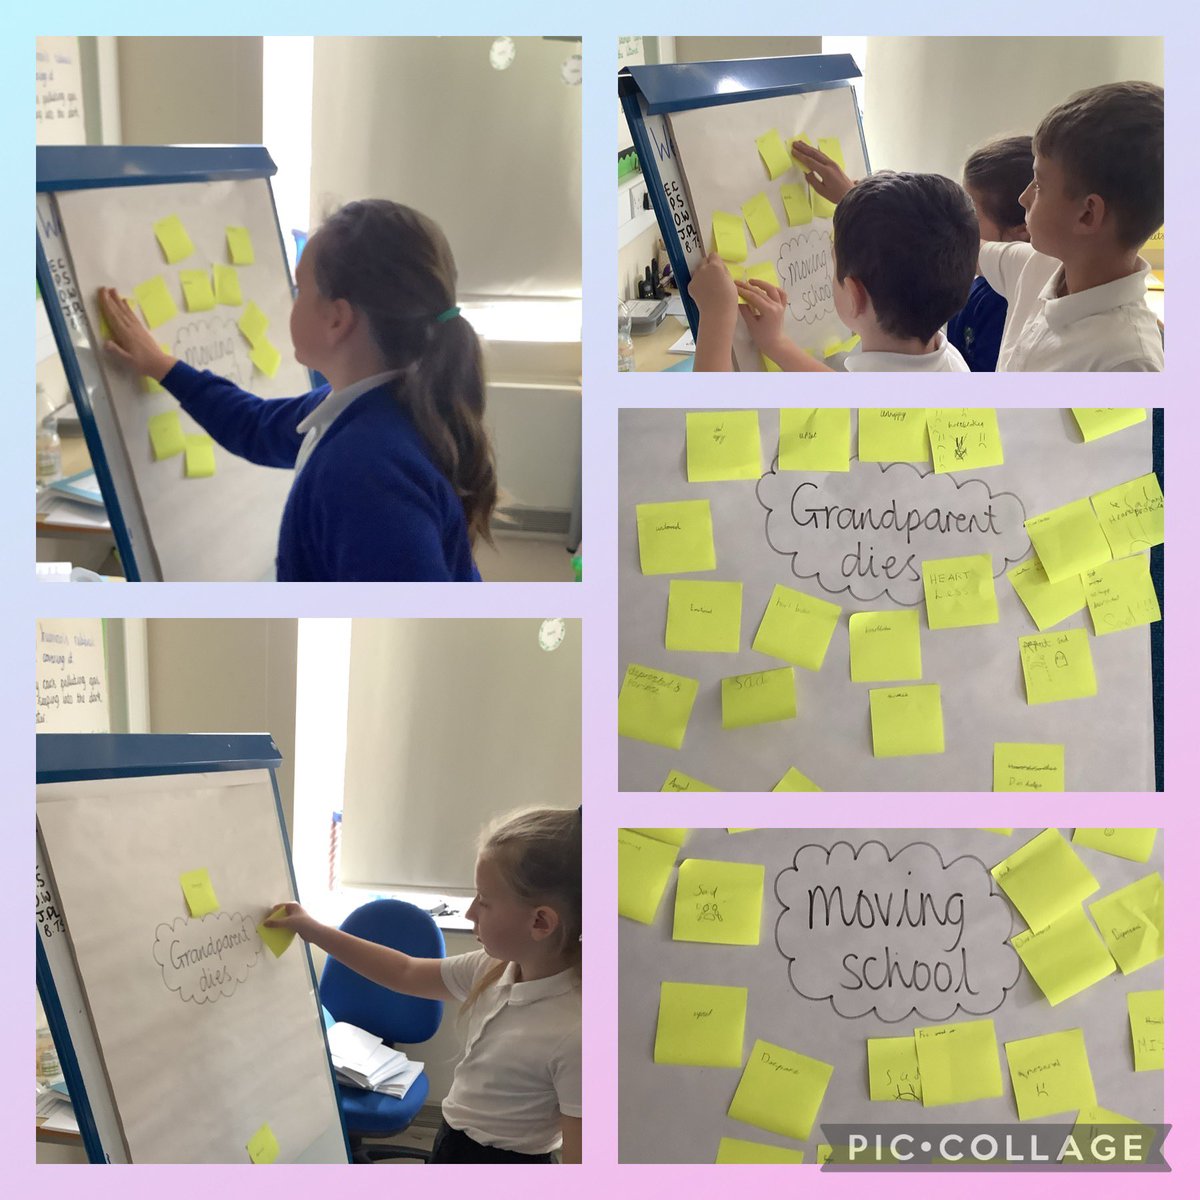 Thinking about love and love as part of our relationships topic in Jigsaw. We came up with lots of lovely ways to remember those who are special to us. #dallampshe